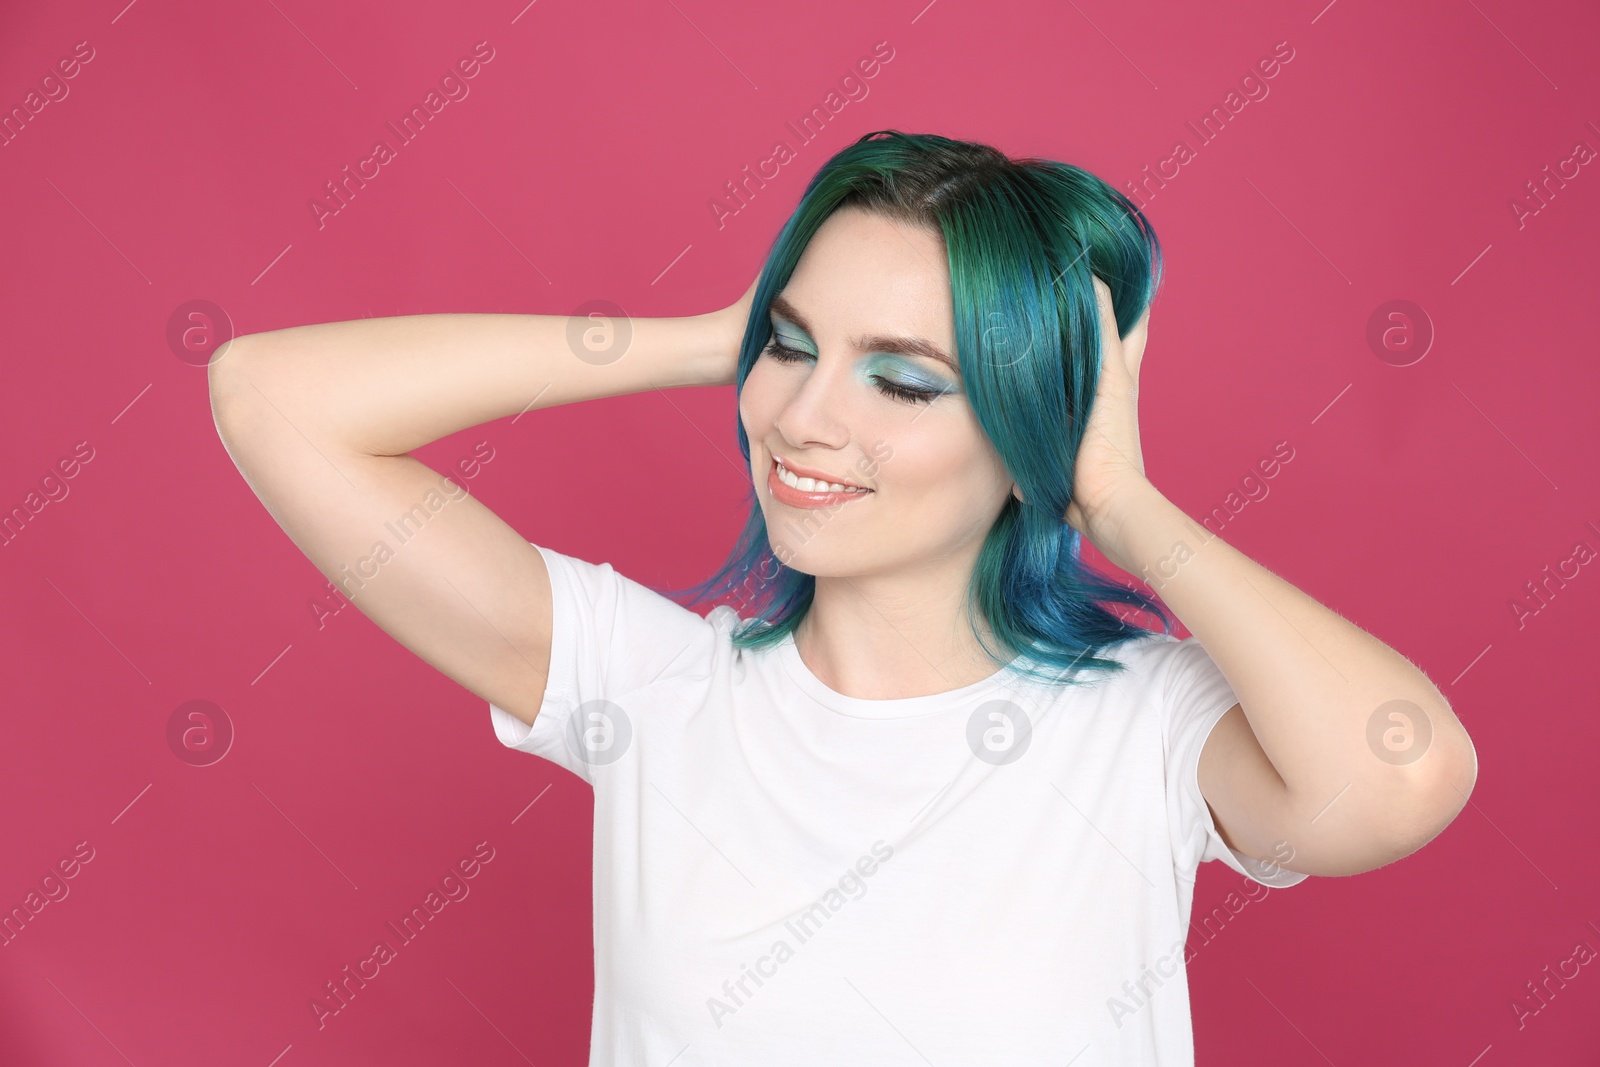 Photo of Young woman with bright dyed hair on pink background